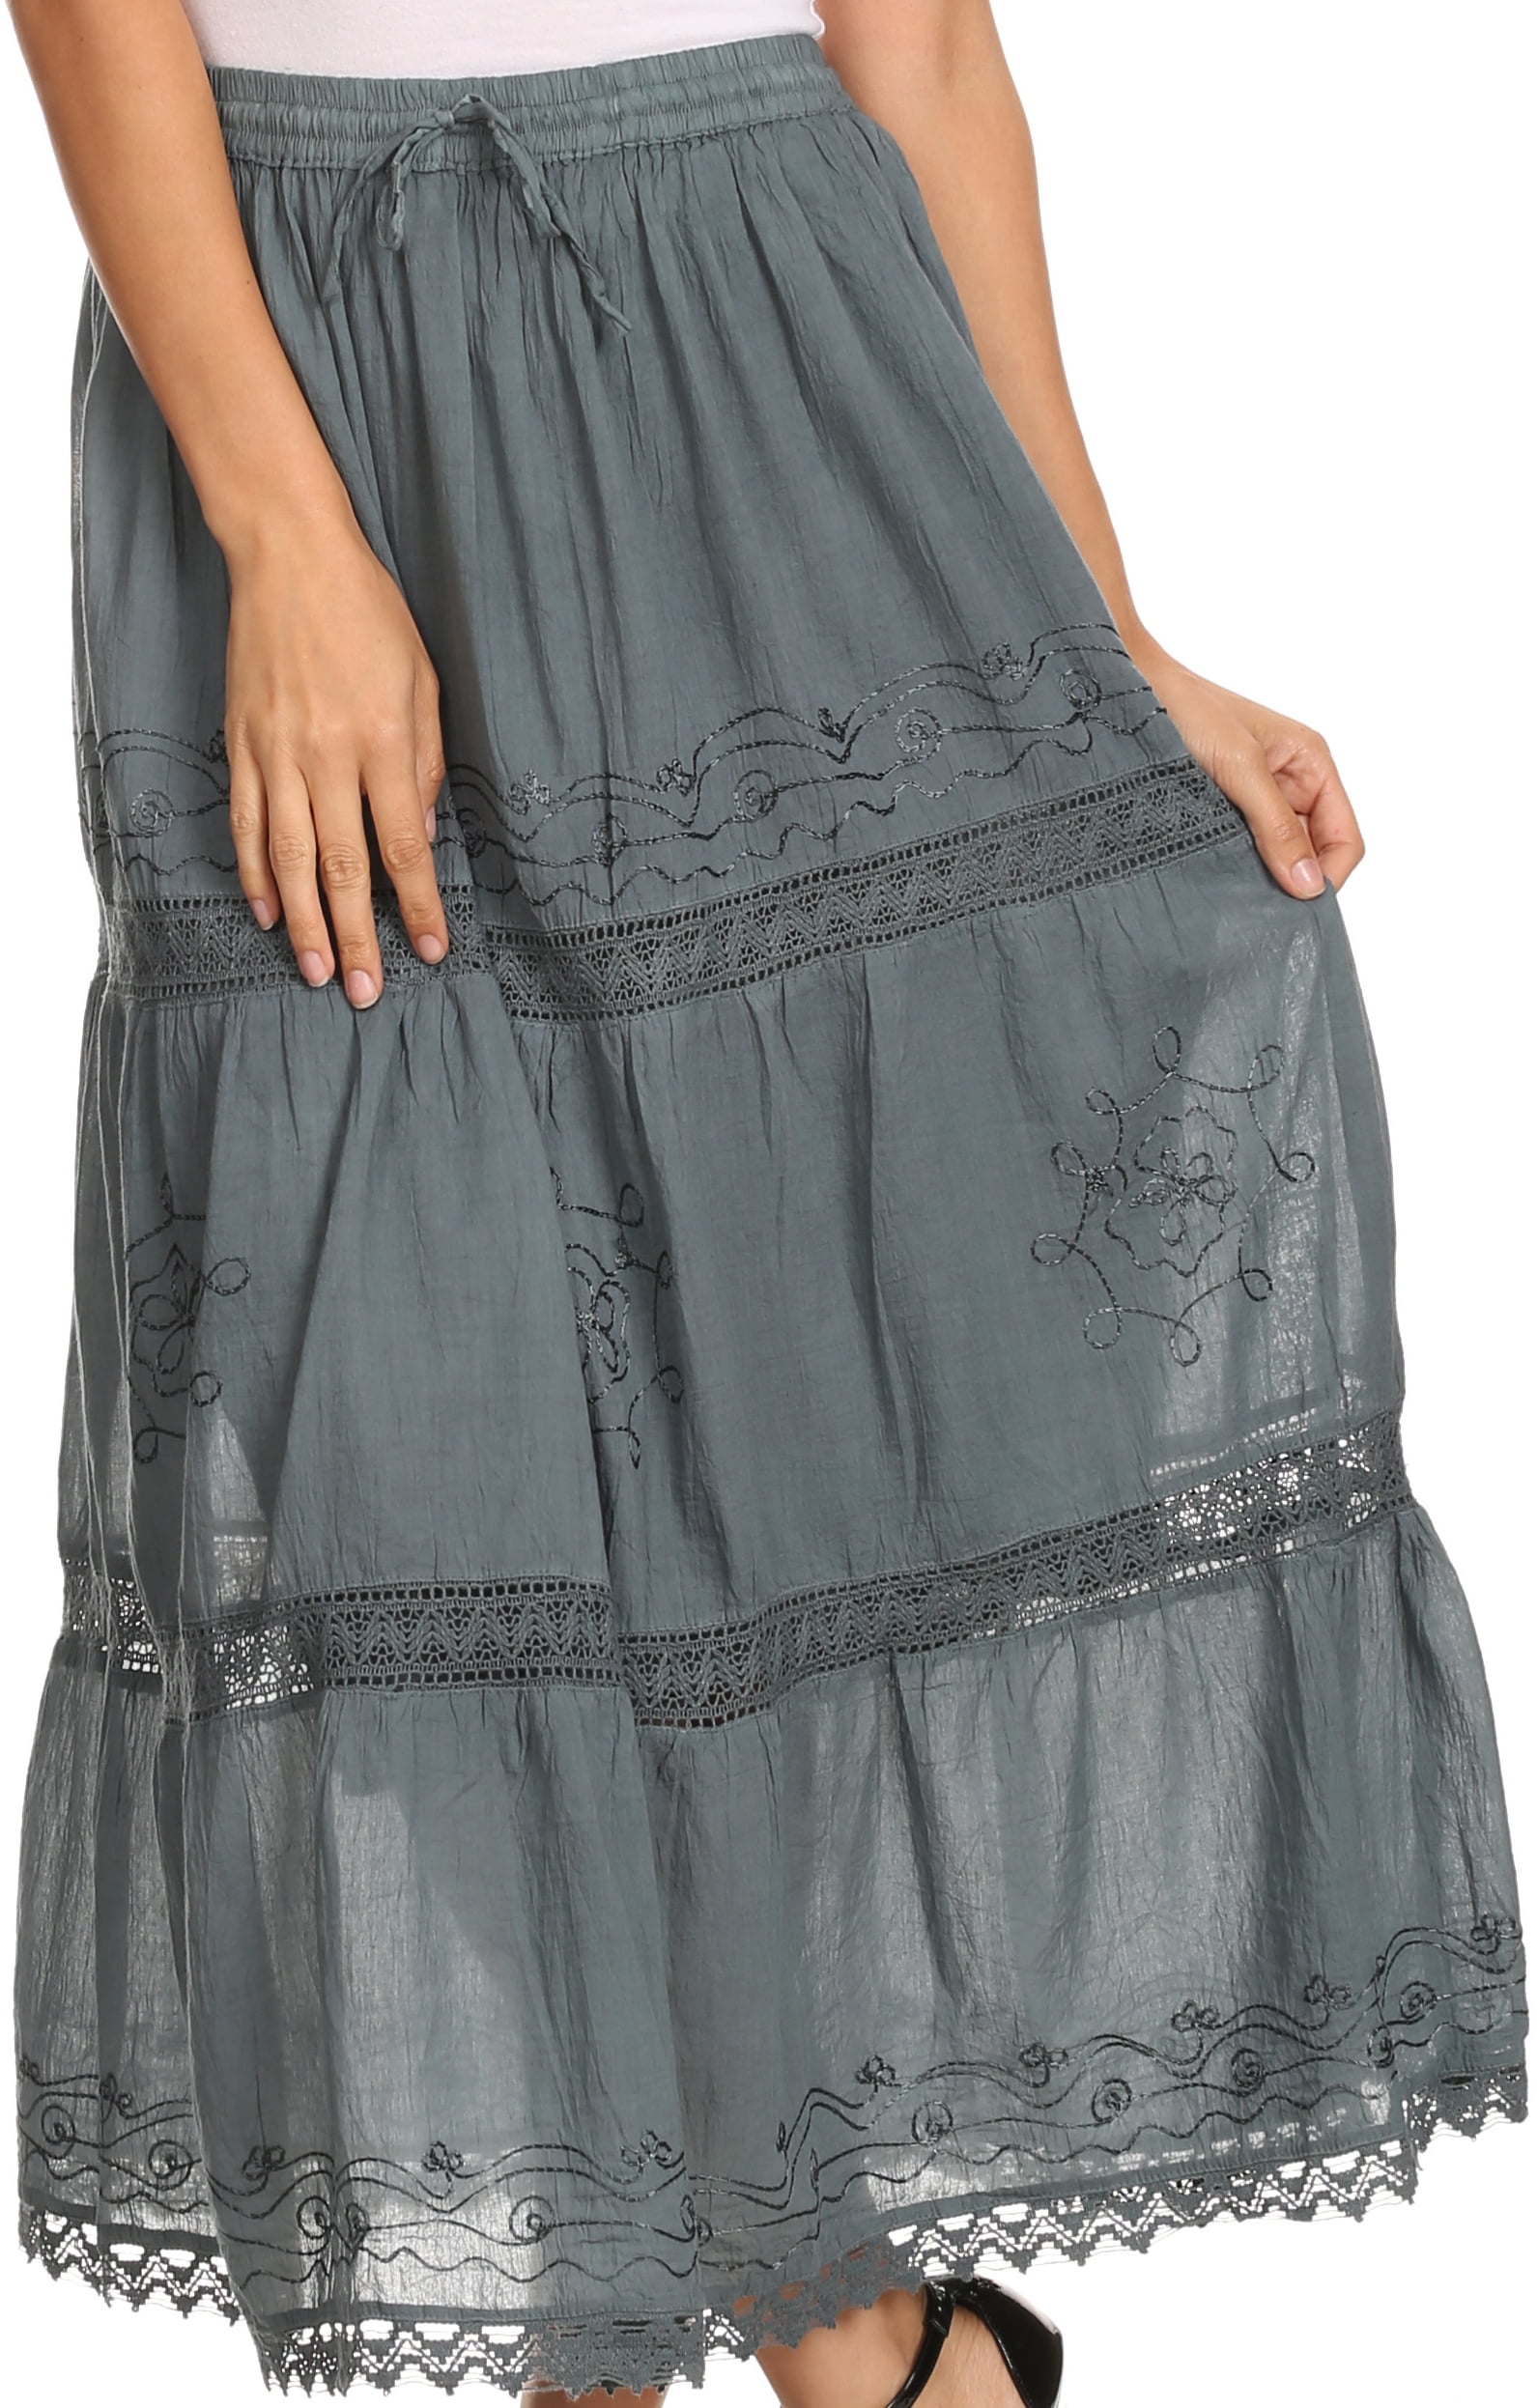 Sakkas Solid Embroidered Gypsy Bohemian Mid Length Cotton Skirt - Gray -  One Size - Walmart.com